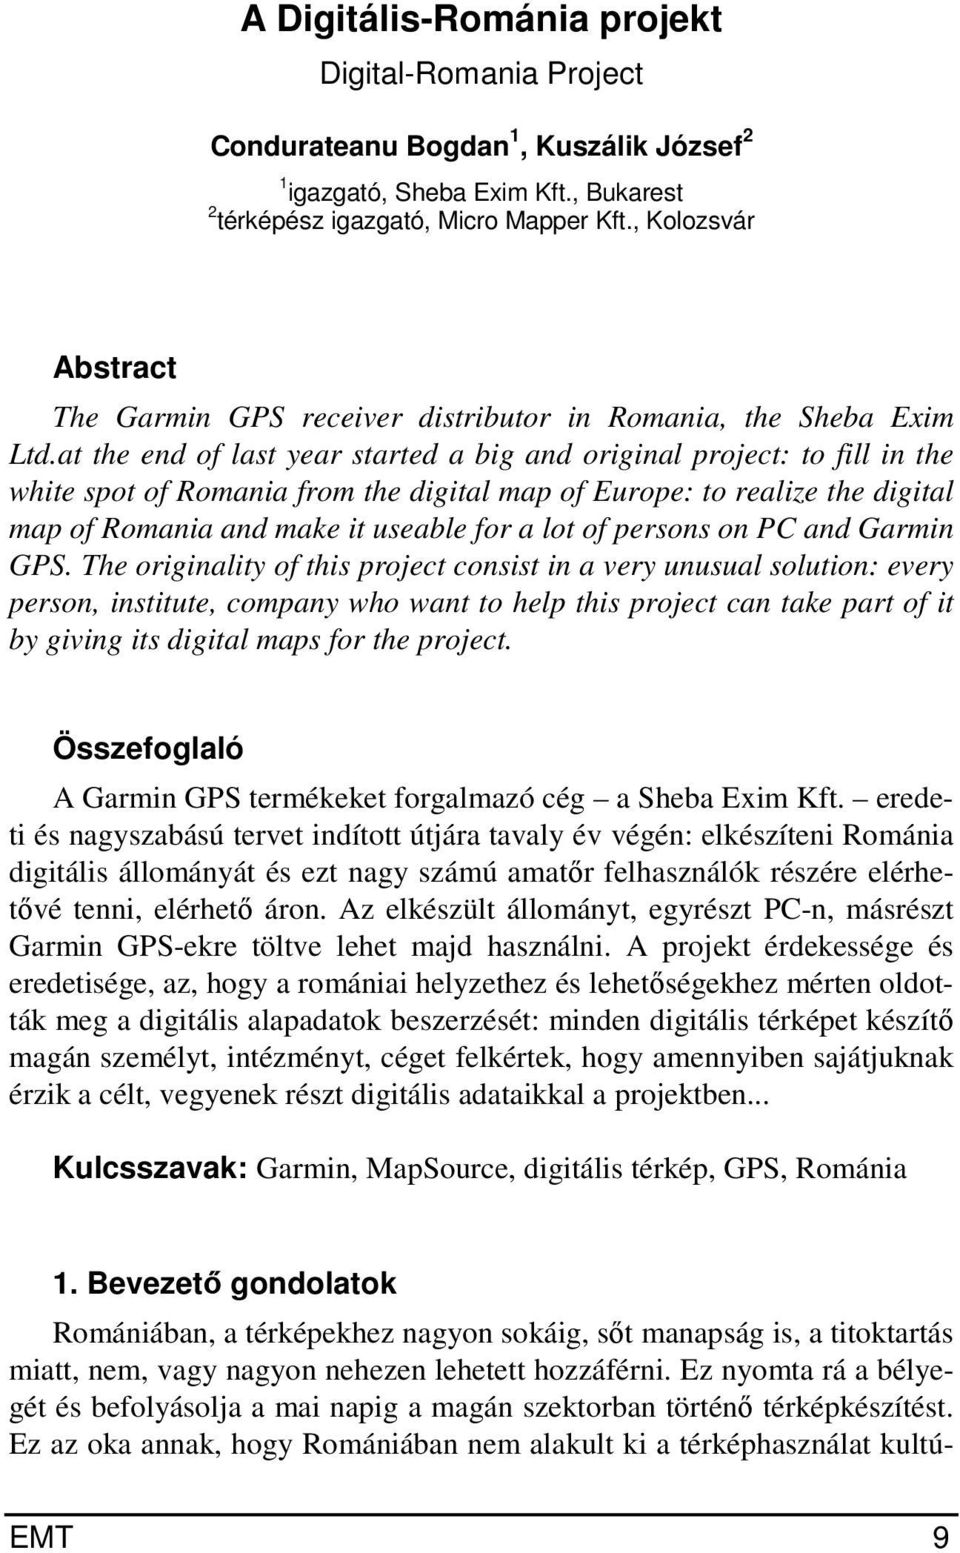 at the end of last year started a big and original project: to fill in the white spot of Romania from the digital map of Europe: to realize the digital map of Romania and make it useable for a lot of